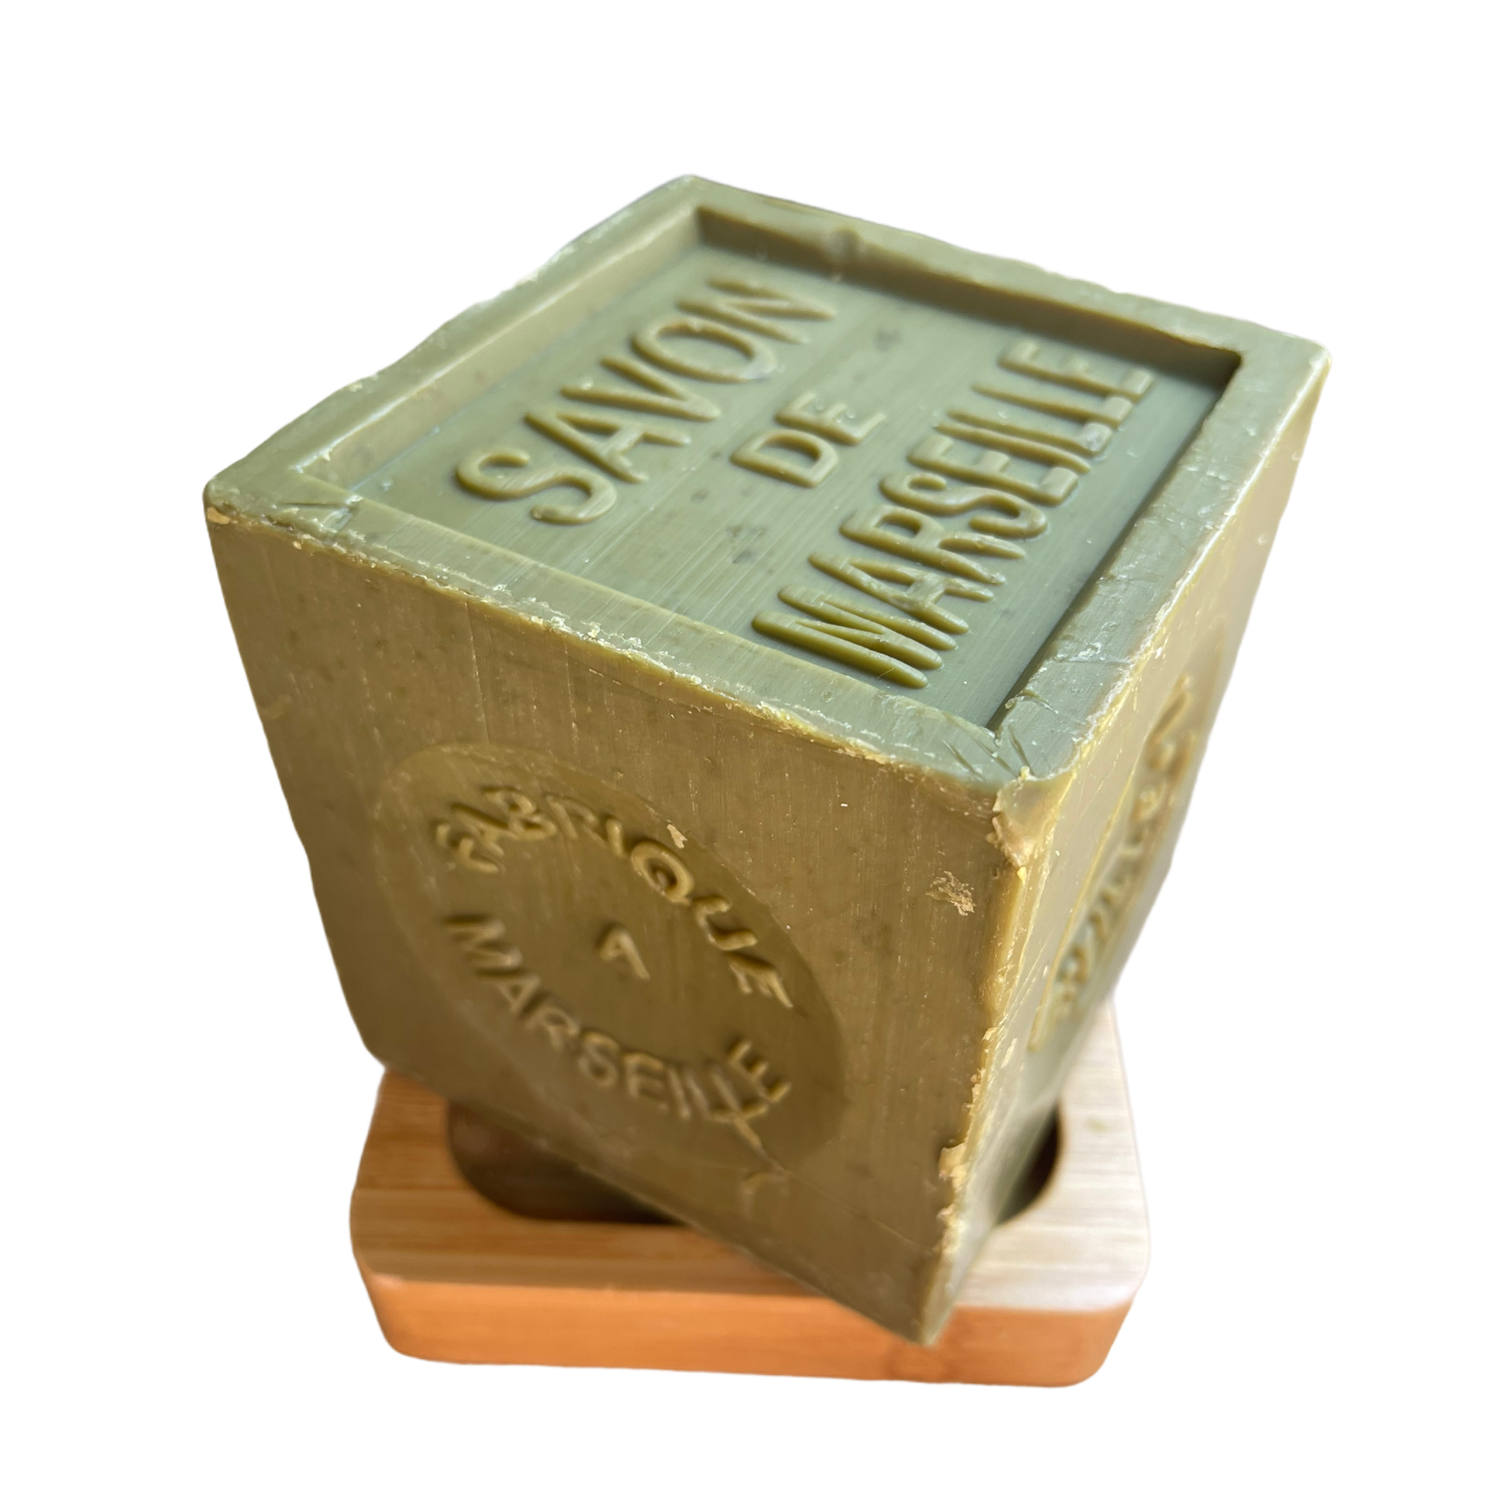 600g olive oil cube soap and bamboo dish